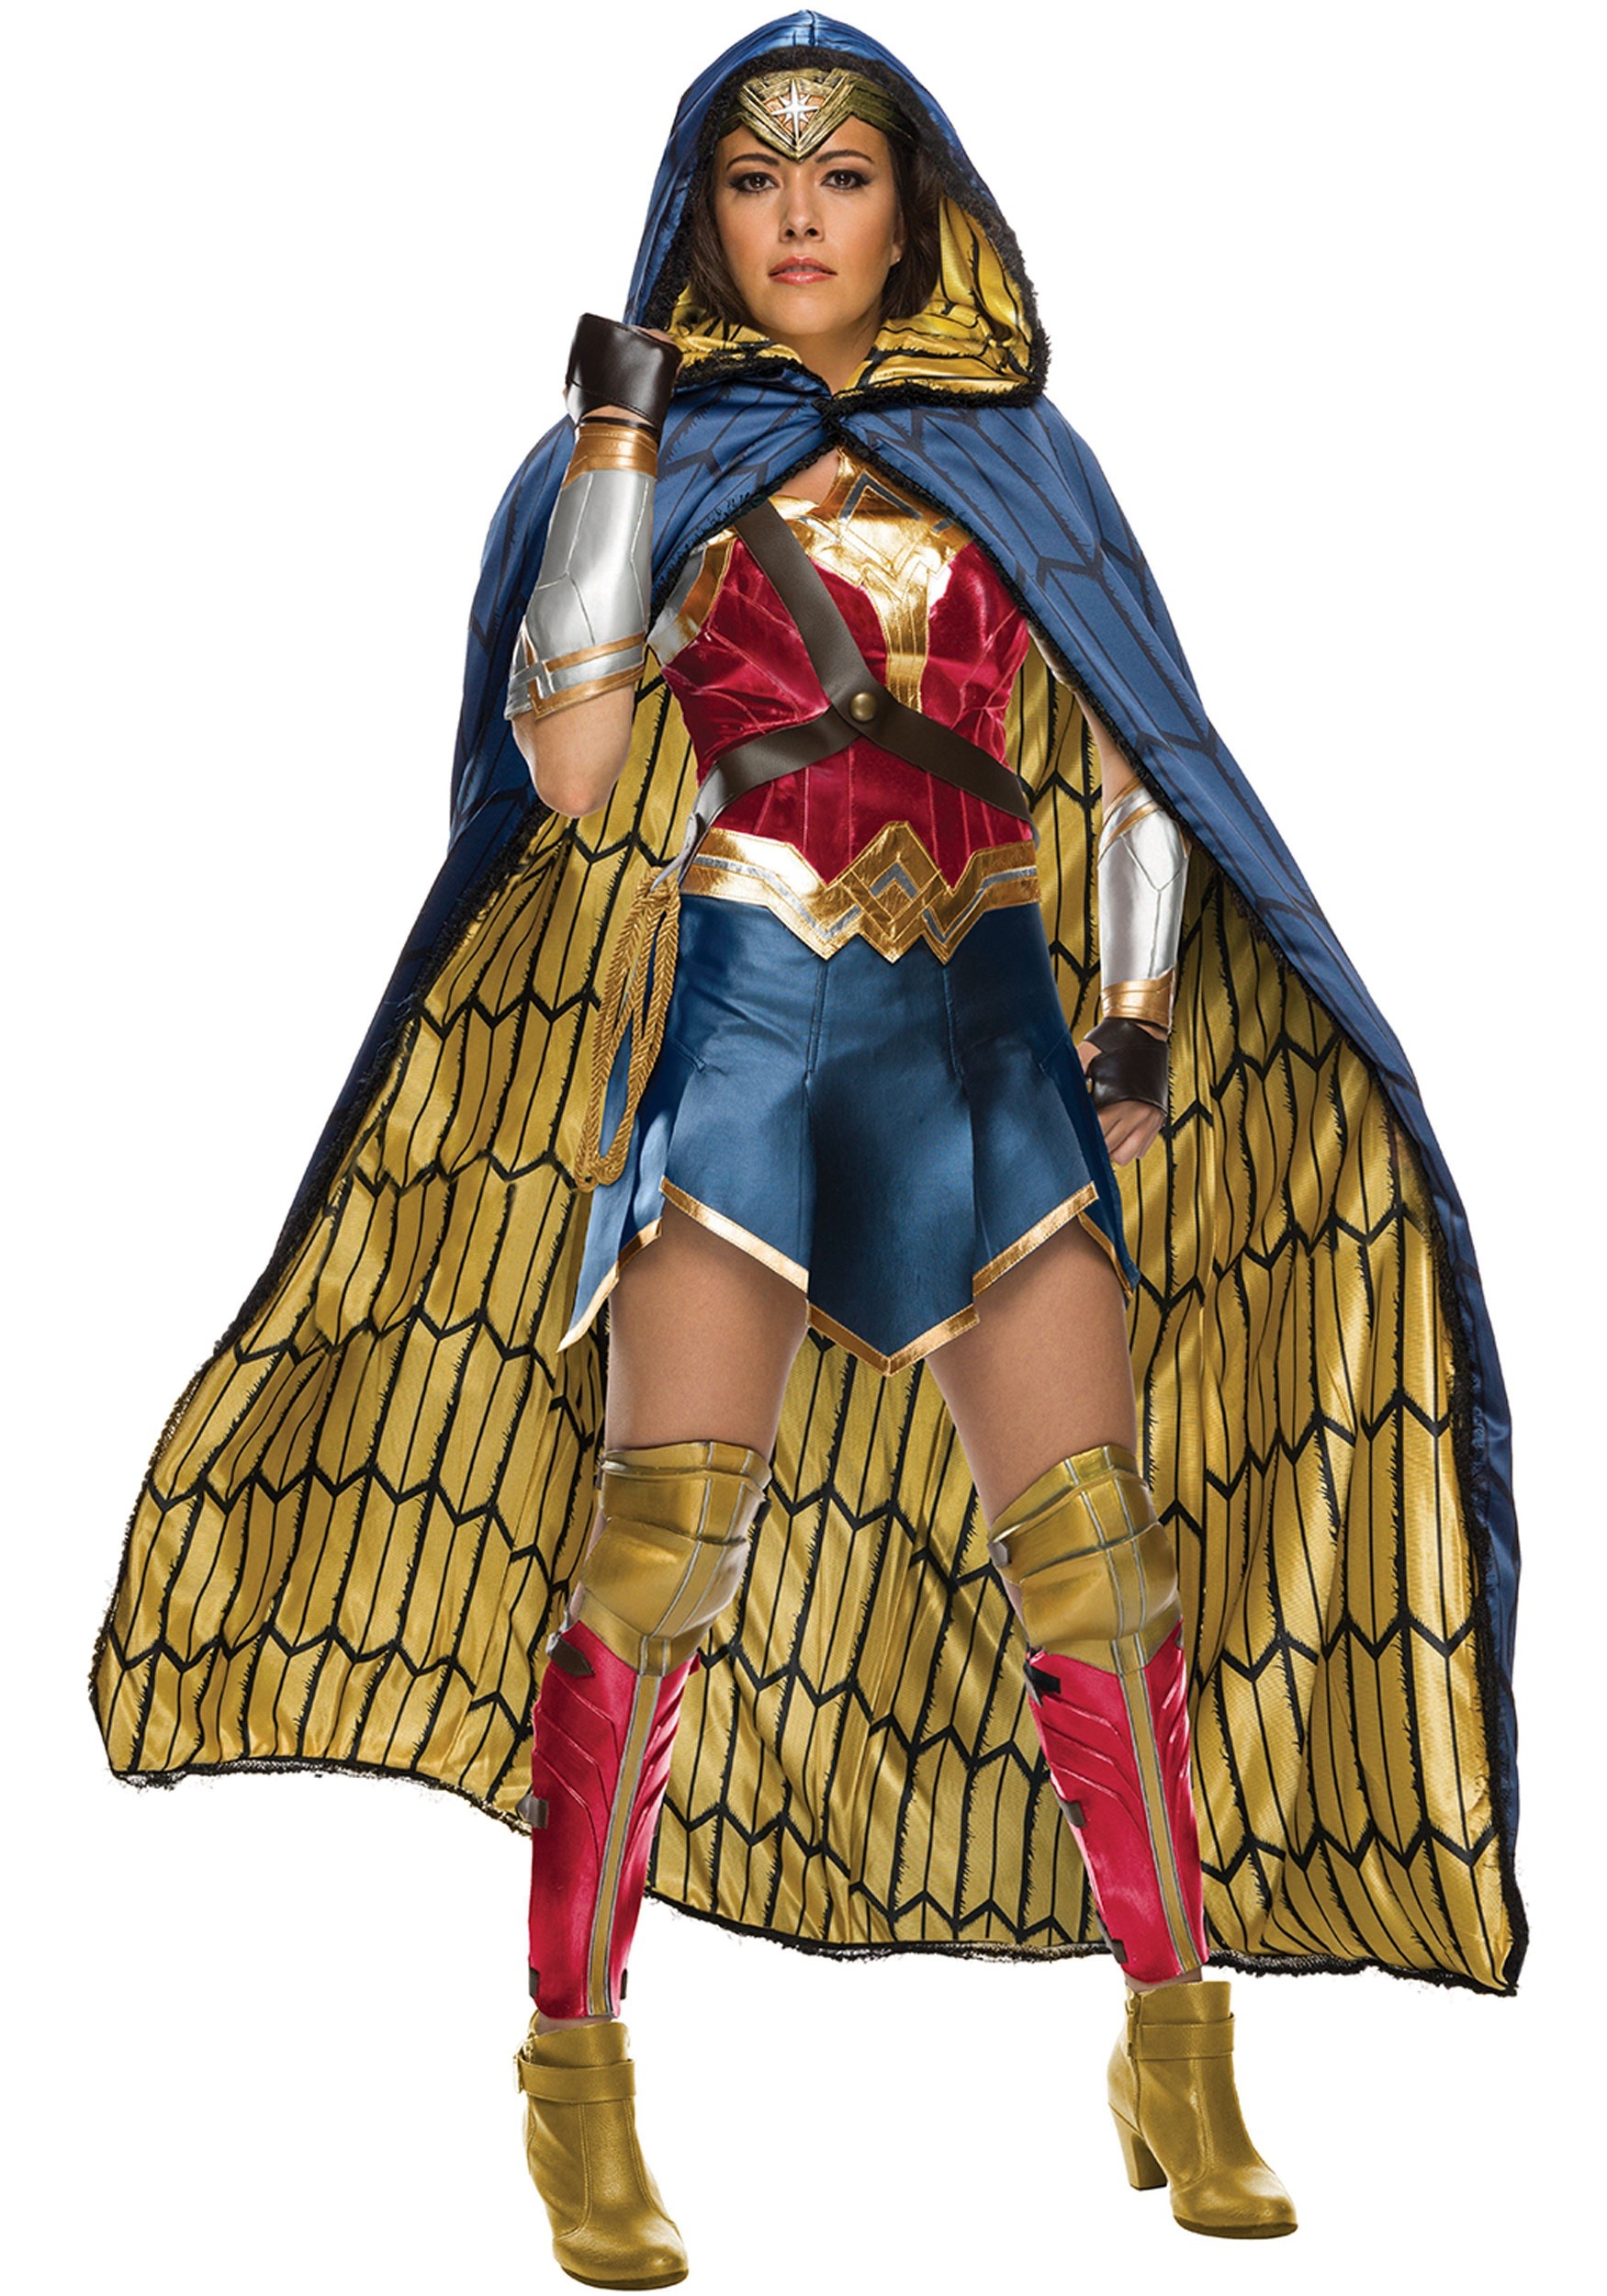 14.) High Quality Wonder Woman Costume for a Woman